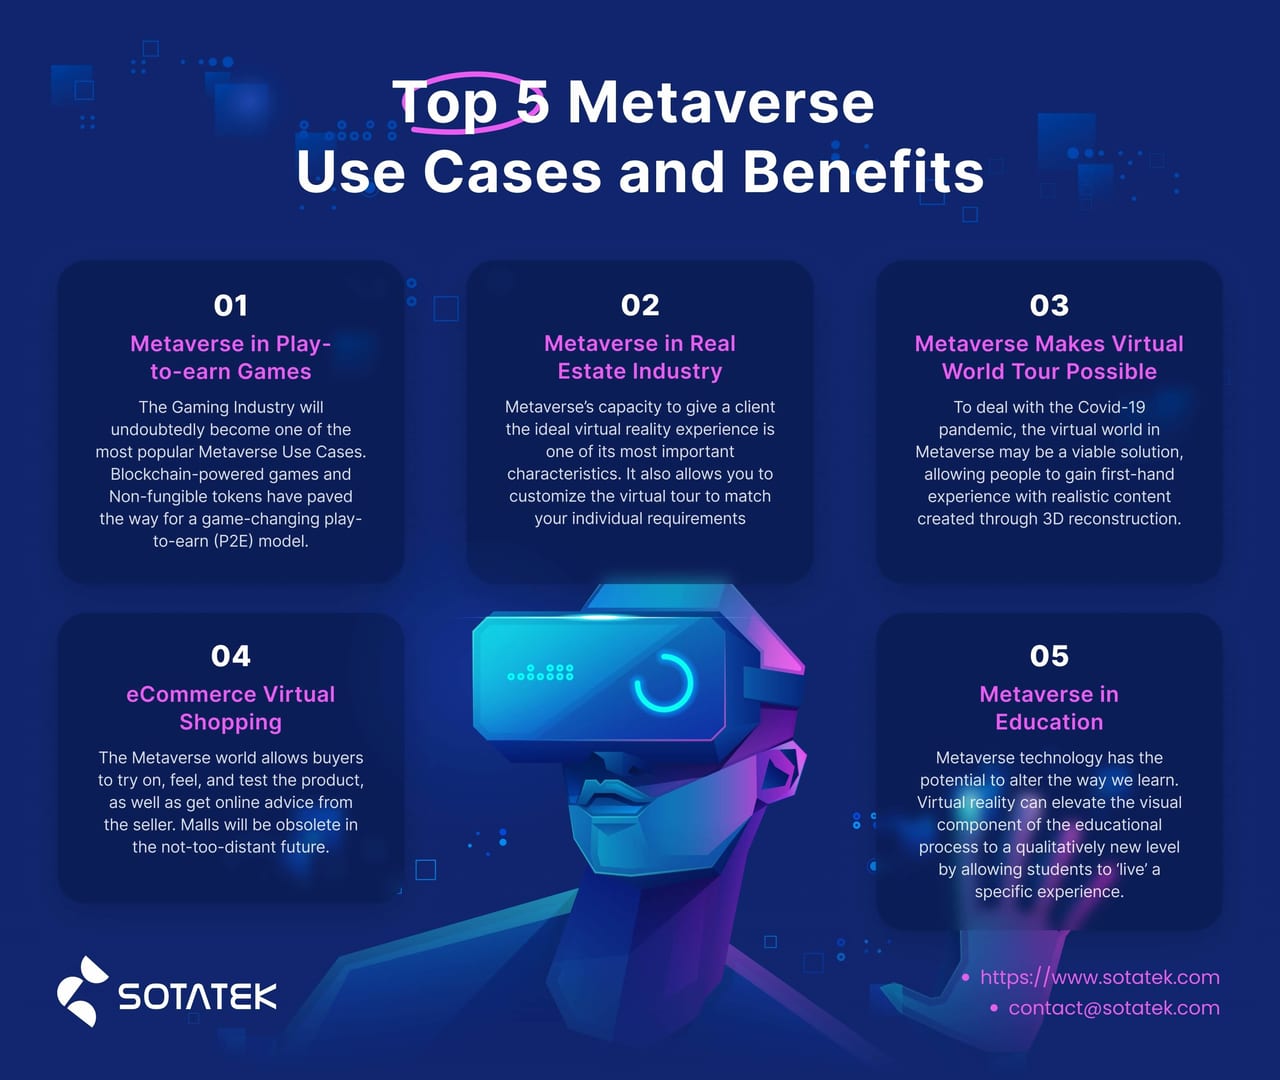 Top 5 Metaverse Use Cases